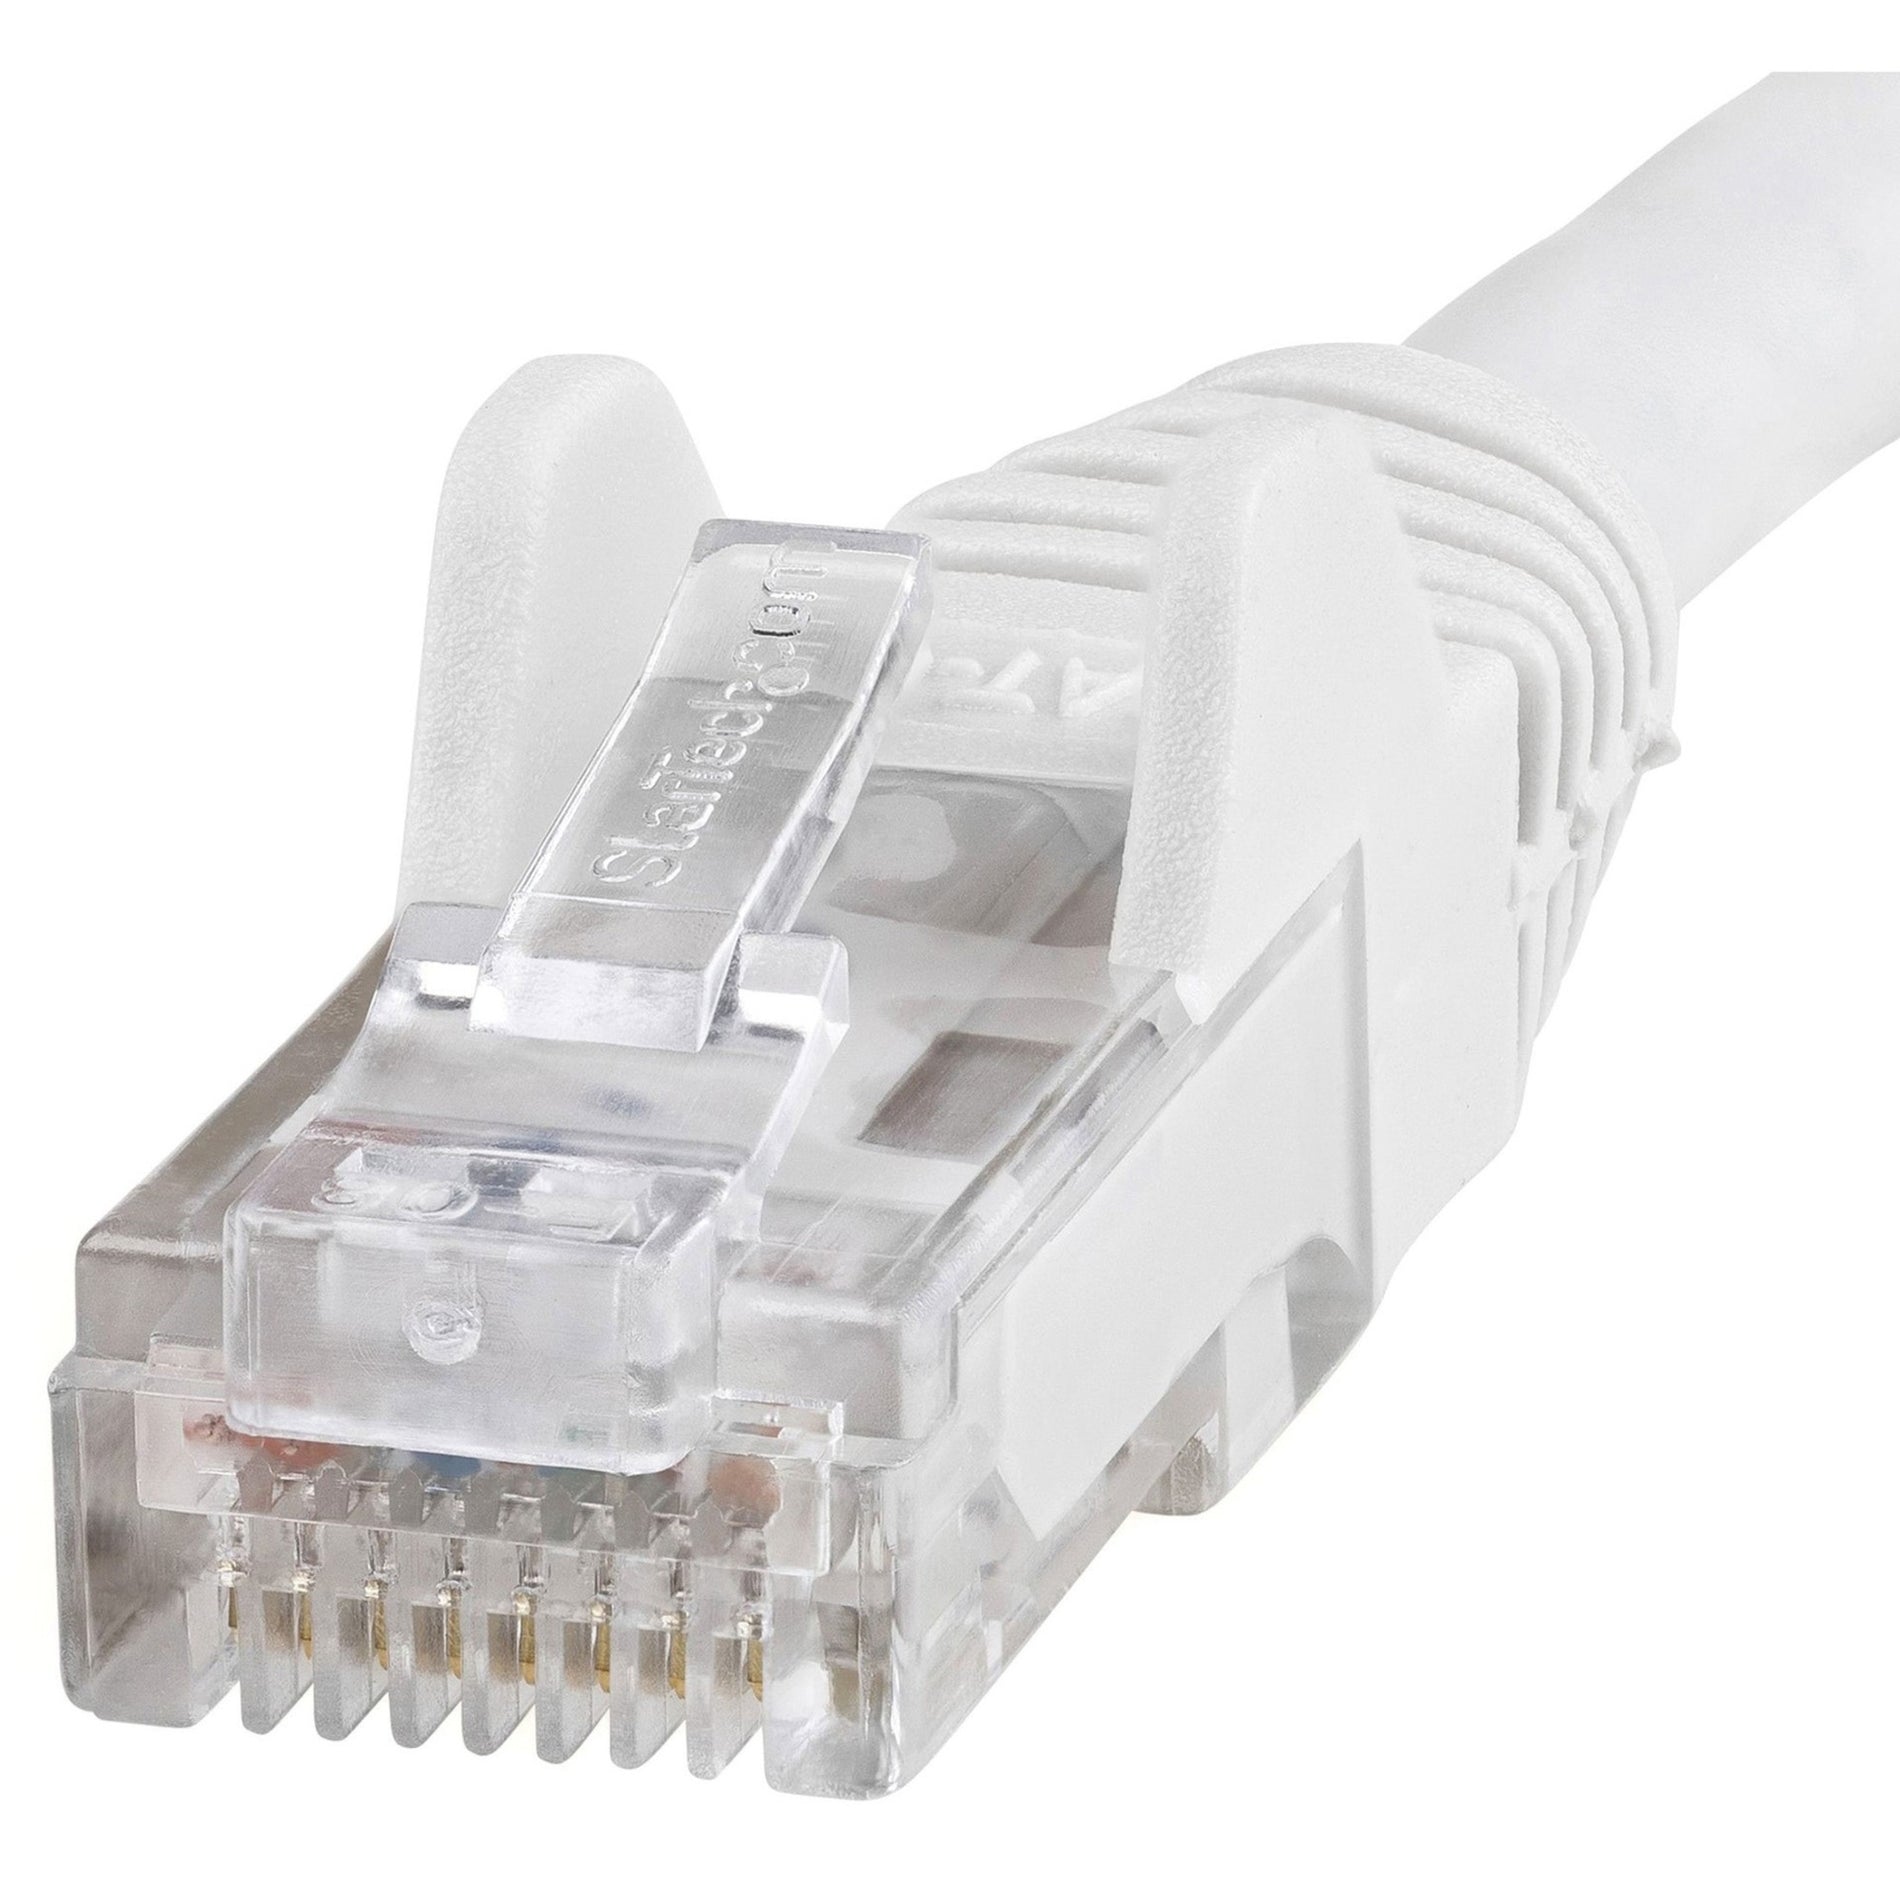 StarTech.com N6PATCH3WH 3 ft White Snagless Cat6 UTP Patch Cable, Lifetime Warranty, 10 Gbit/s Data Transfer Rate, Corrosion Resistant